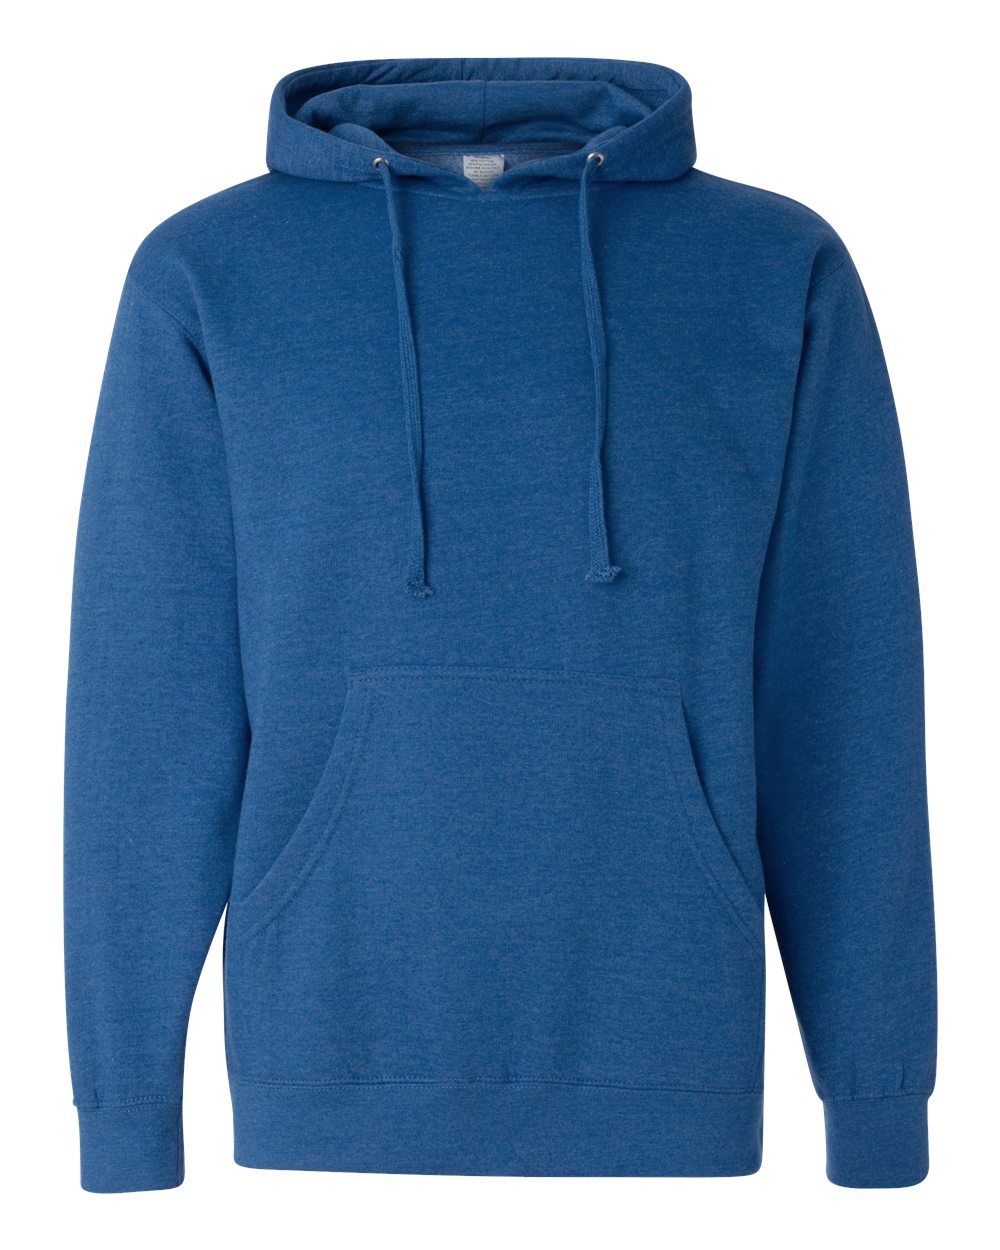 Independent Trading Co. SS4500 Midweight Hooded Sweatshirt–Royal Heather  (XL)